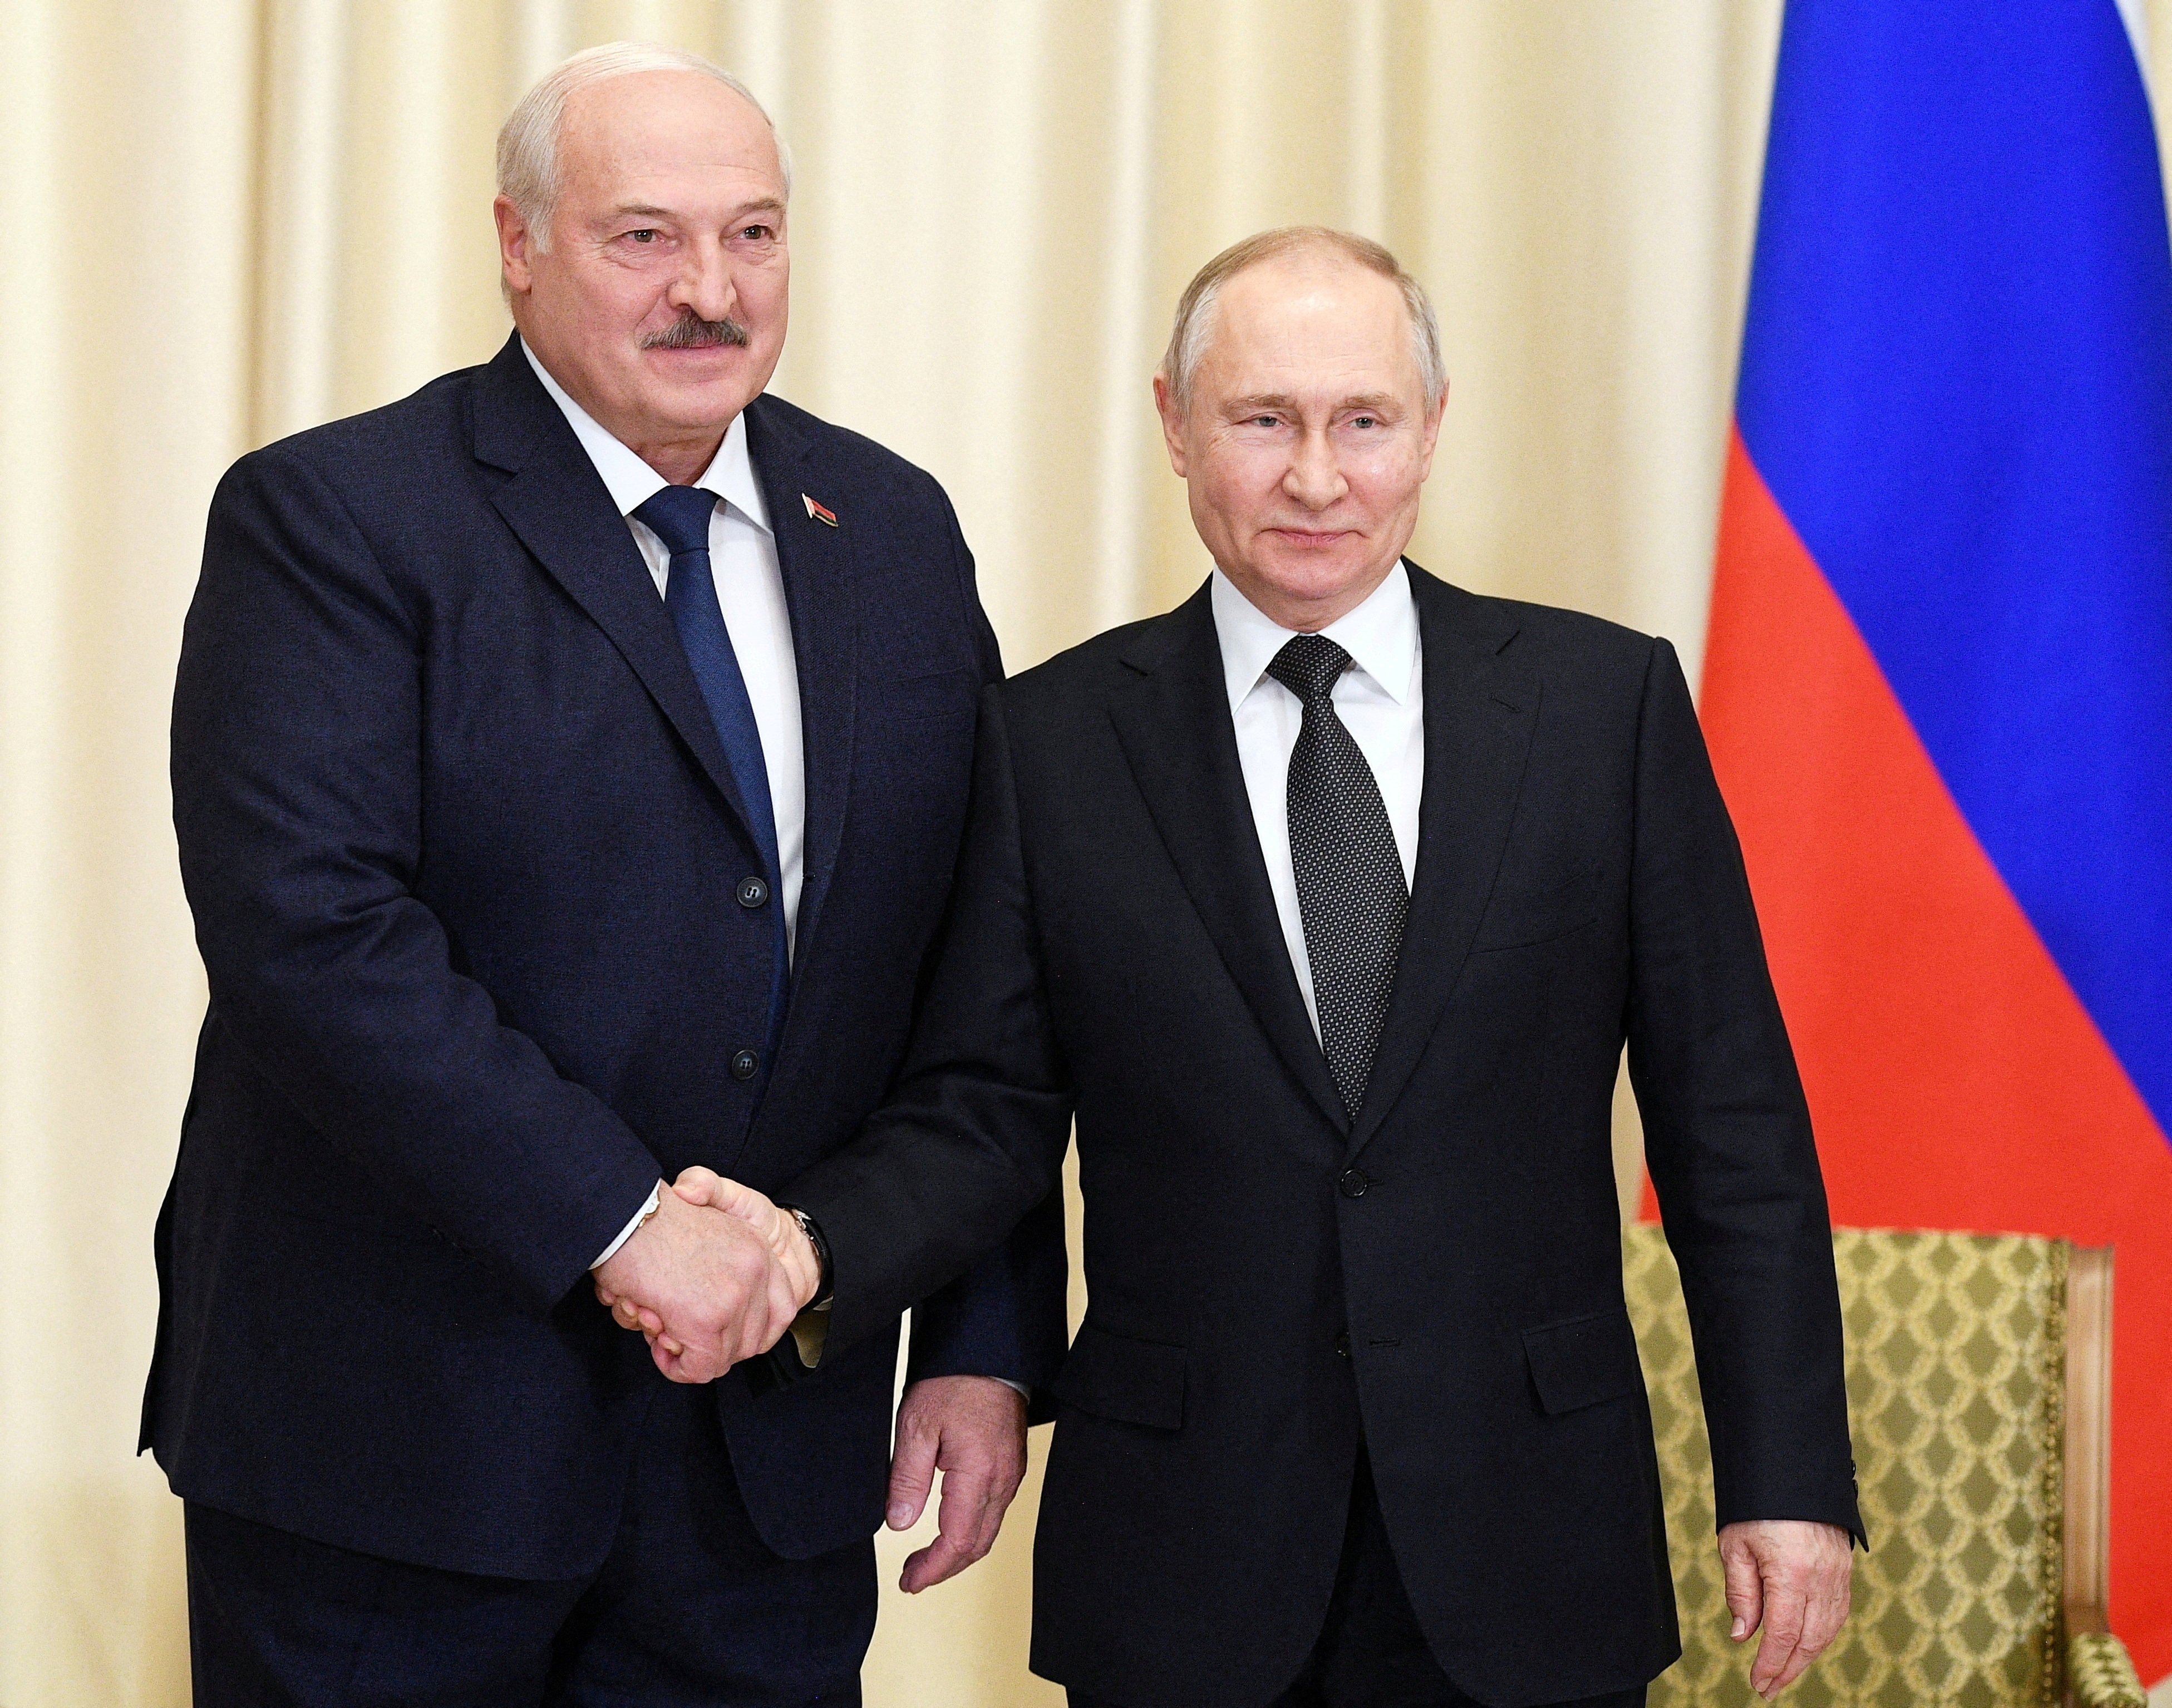 Belarusian President Alexander Lukashenko, pictured with Vladimir Putin in Moscow, said his country could also host Russian strategic nuclear weapons. Photo: Reuters